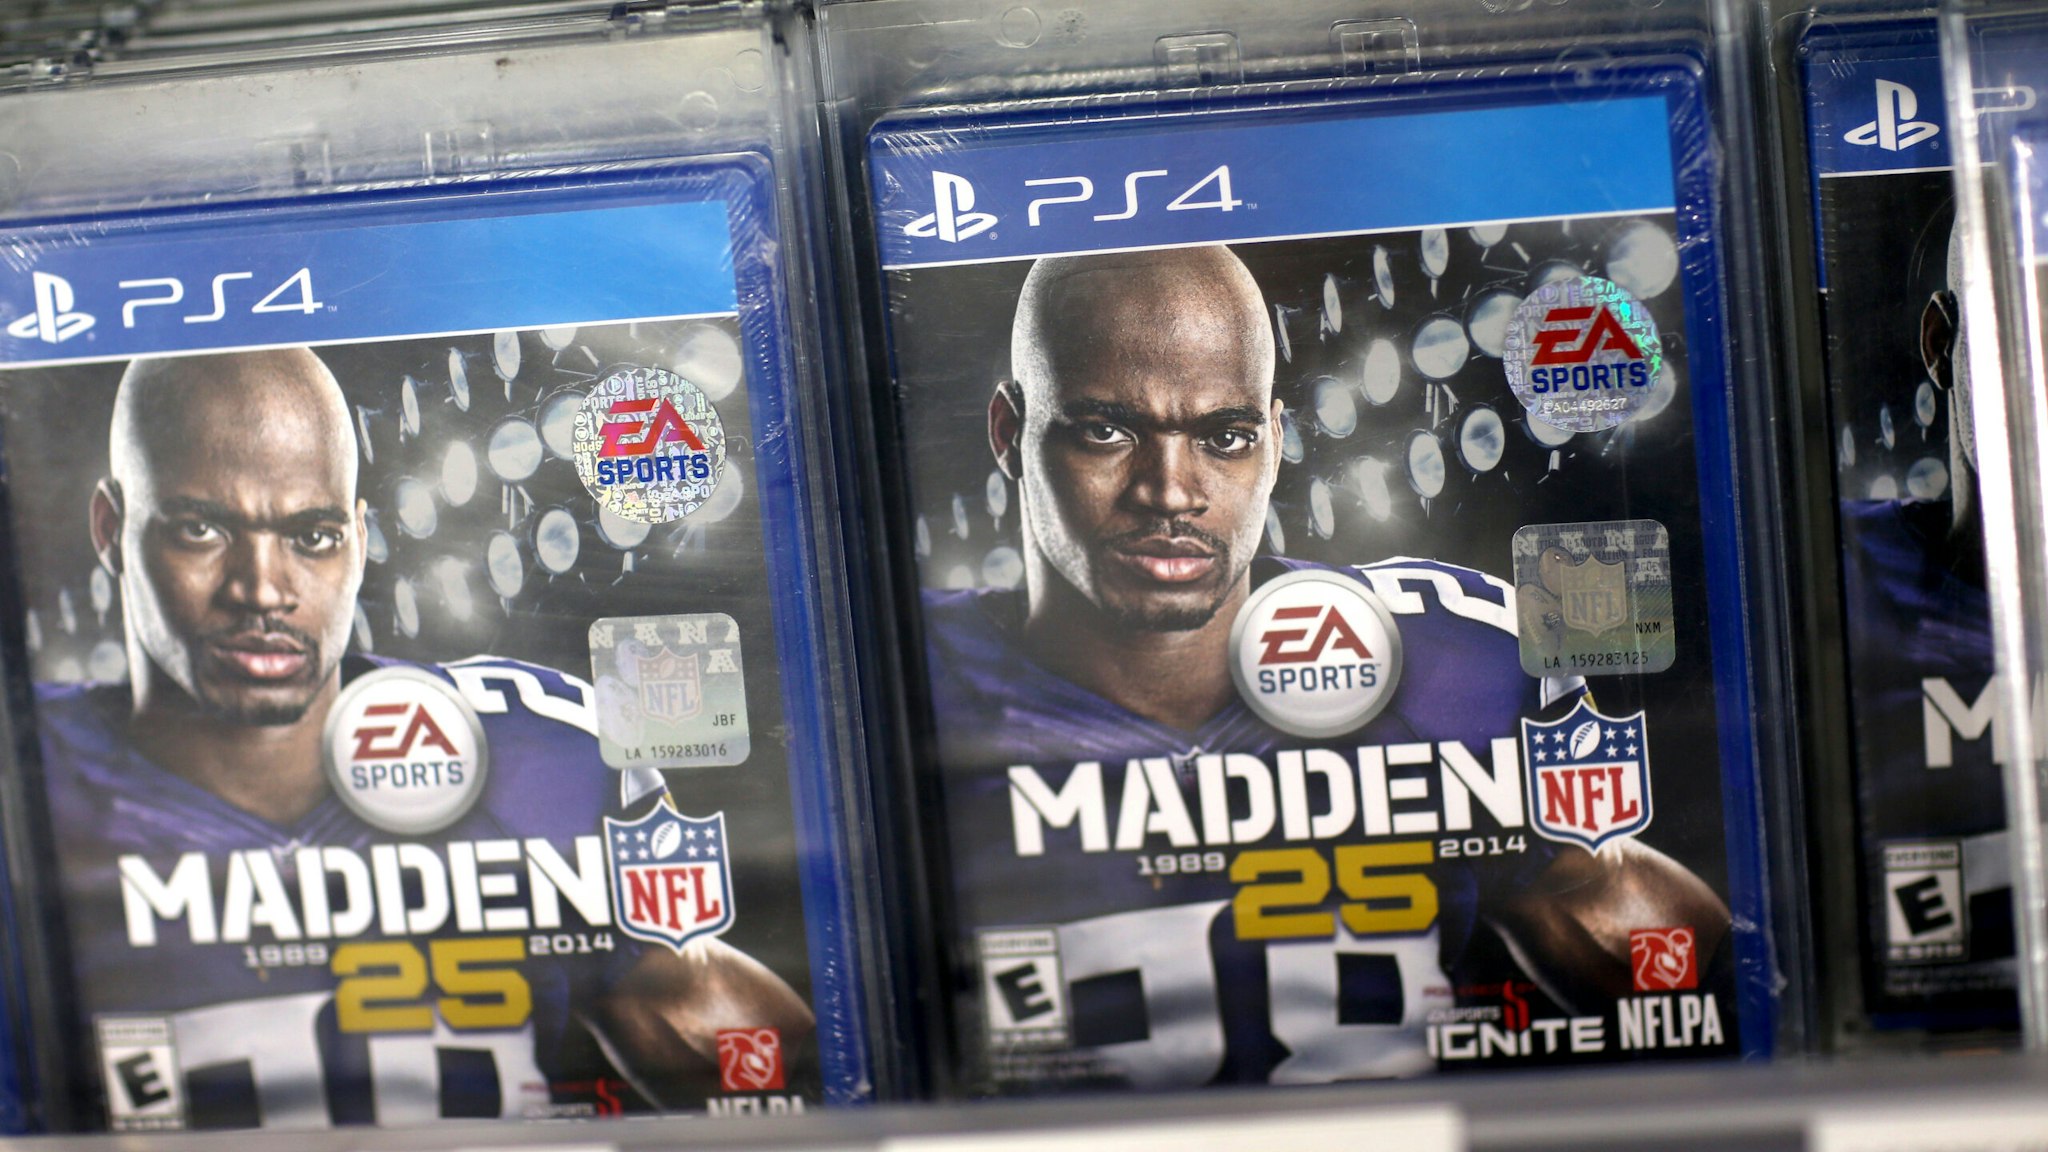 PEMBROKE PINES, FL - NOVEMBER 15: Madden 25 for the new Sony Playstation 4 is seen on display at Best Buy after the console went on sale at midnight on November 15, 2013 in Pembroke Pines, Florida. PlayStation 4 is the follow-up to the company's PlayStation 3 and is priced at $400.